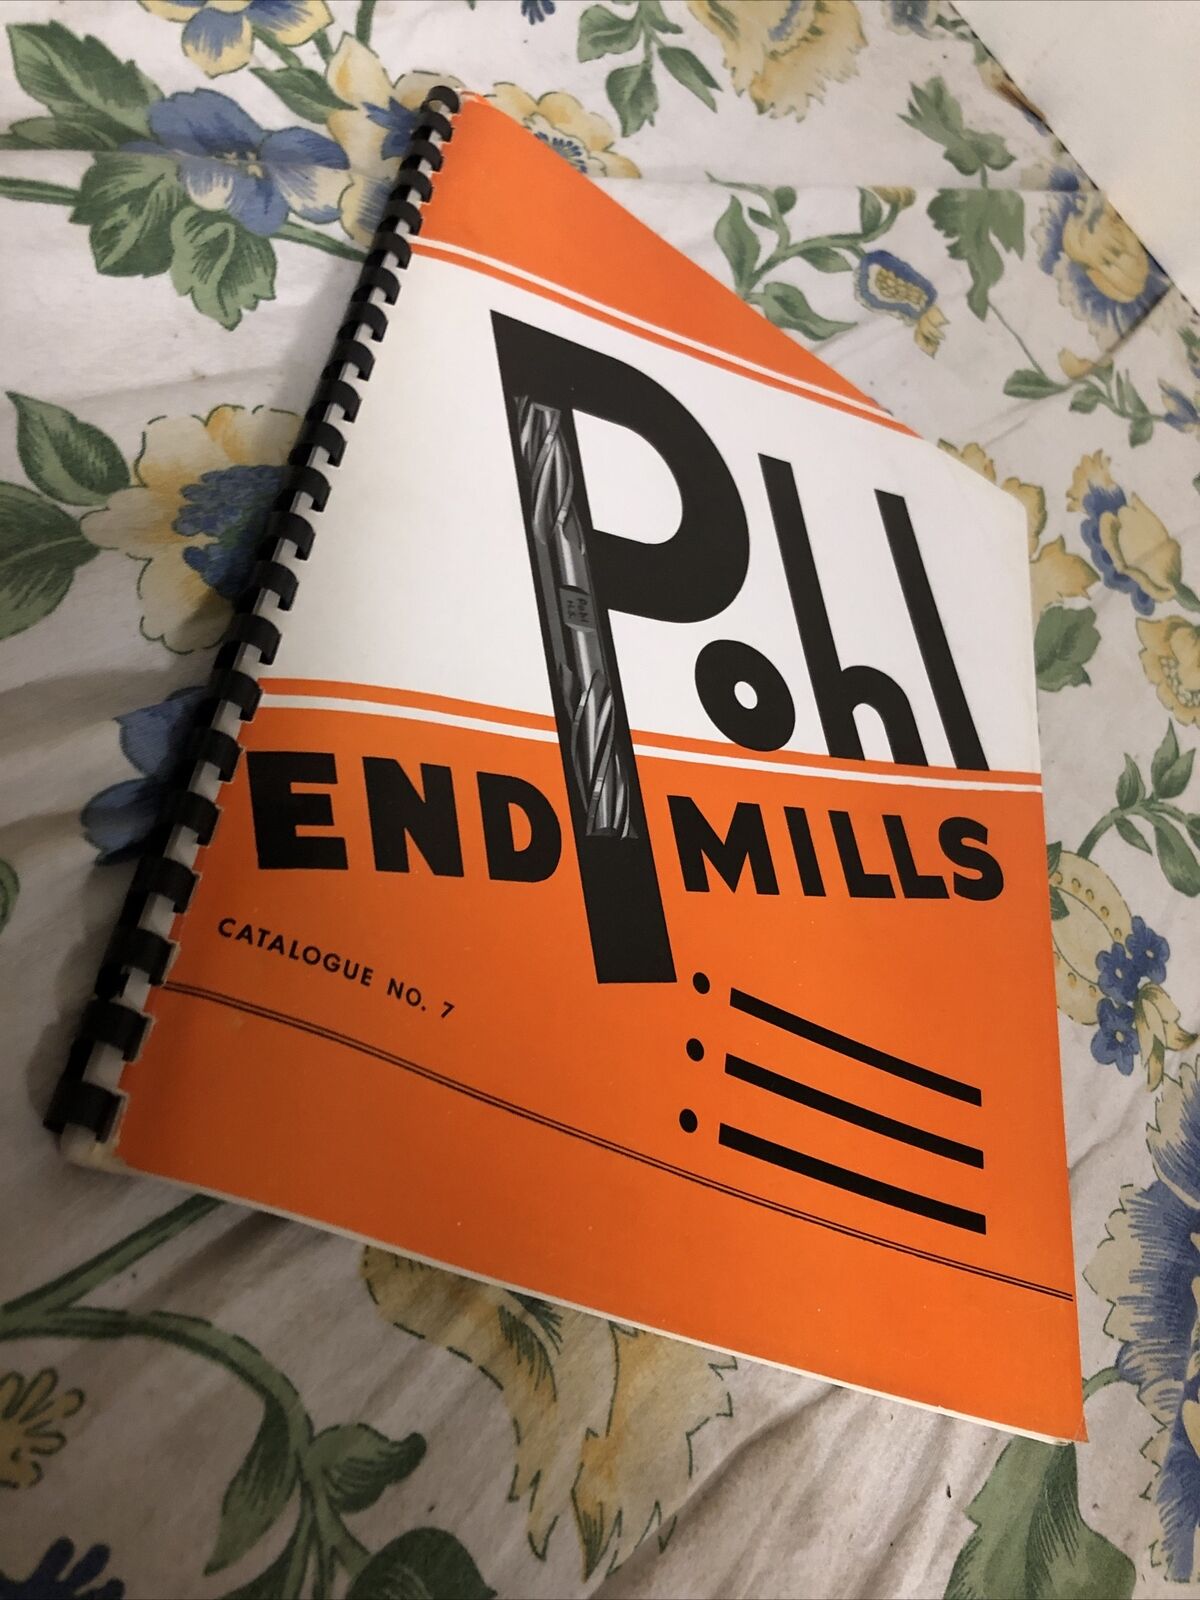 Pohl End Mills Catalogue No. 7  1959